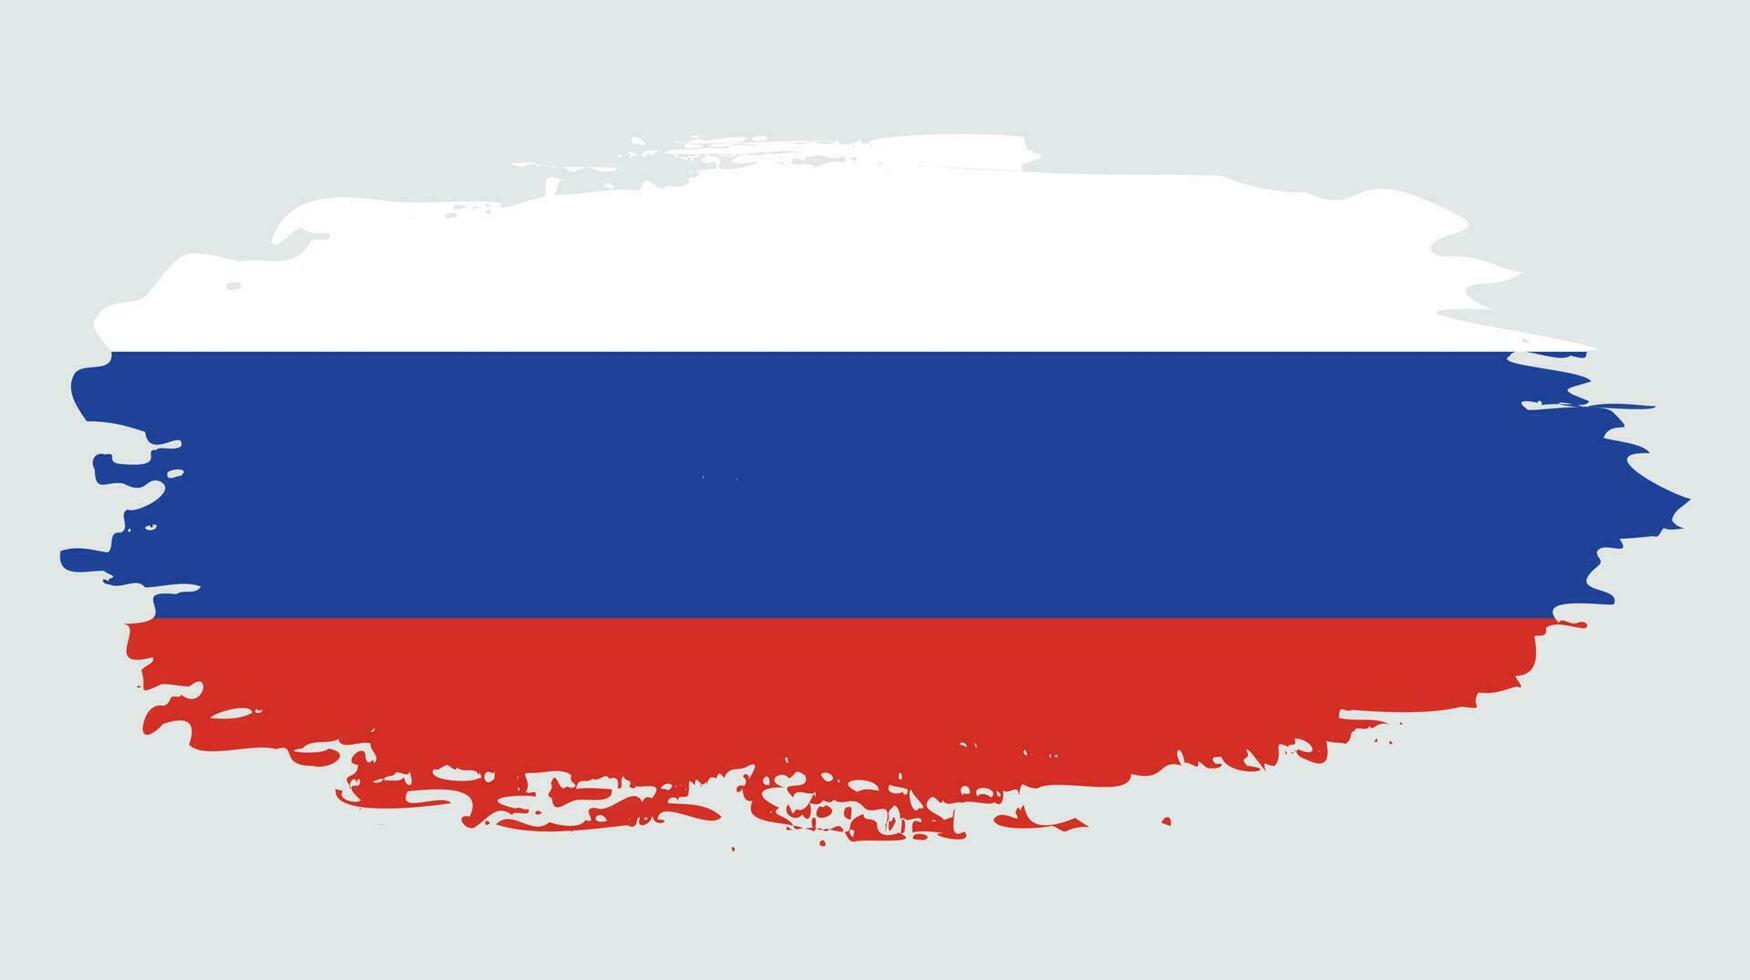 Grunge texture distressed Russia flag vector